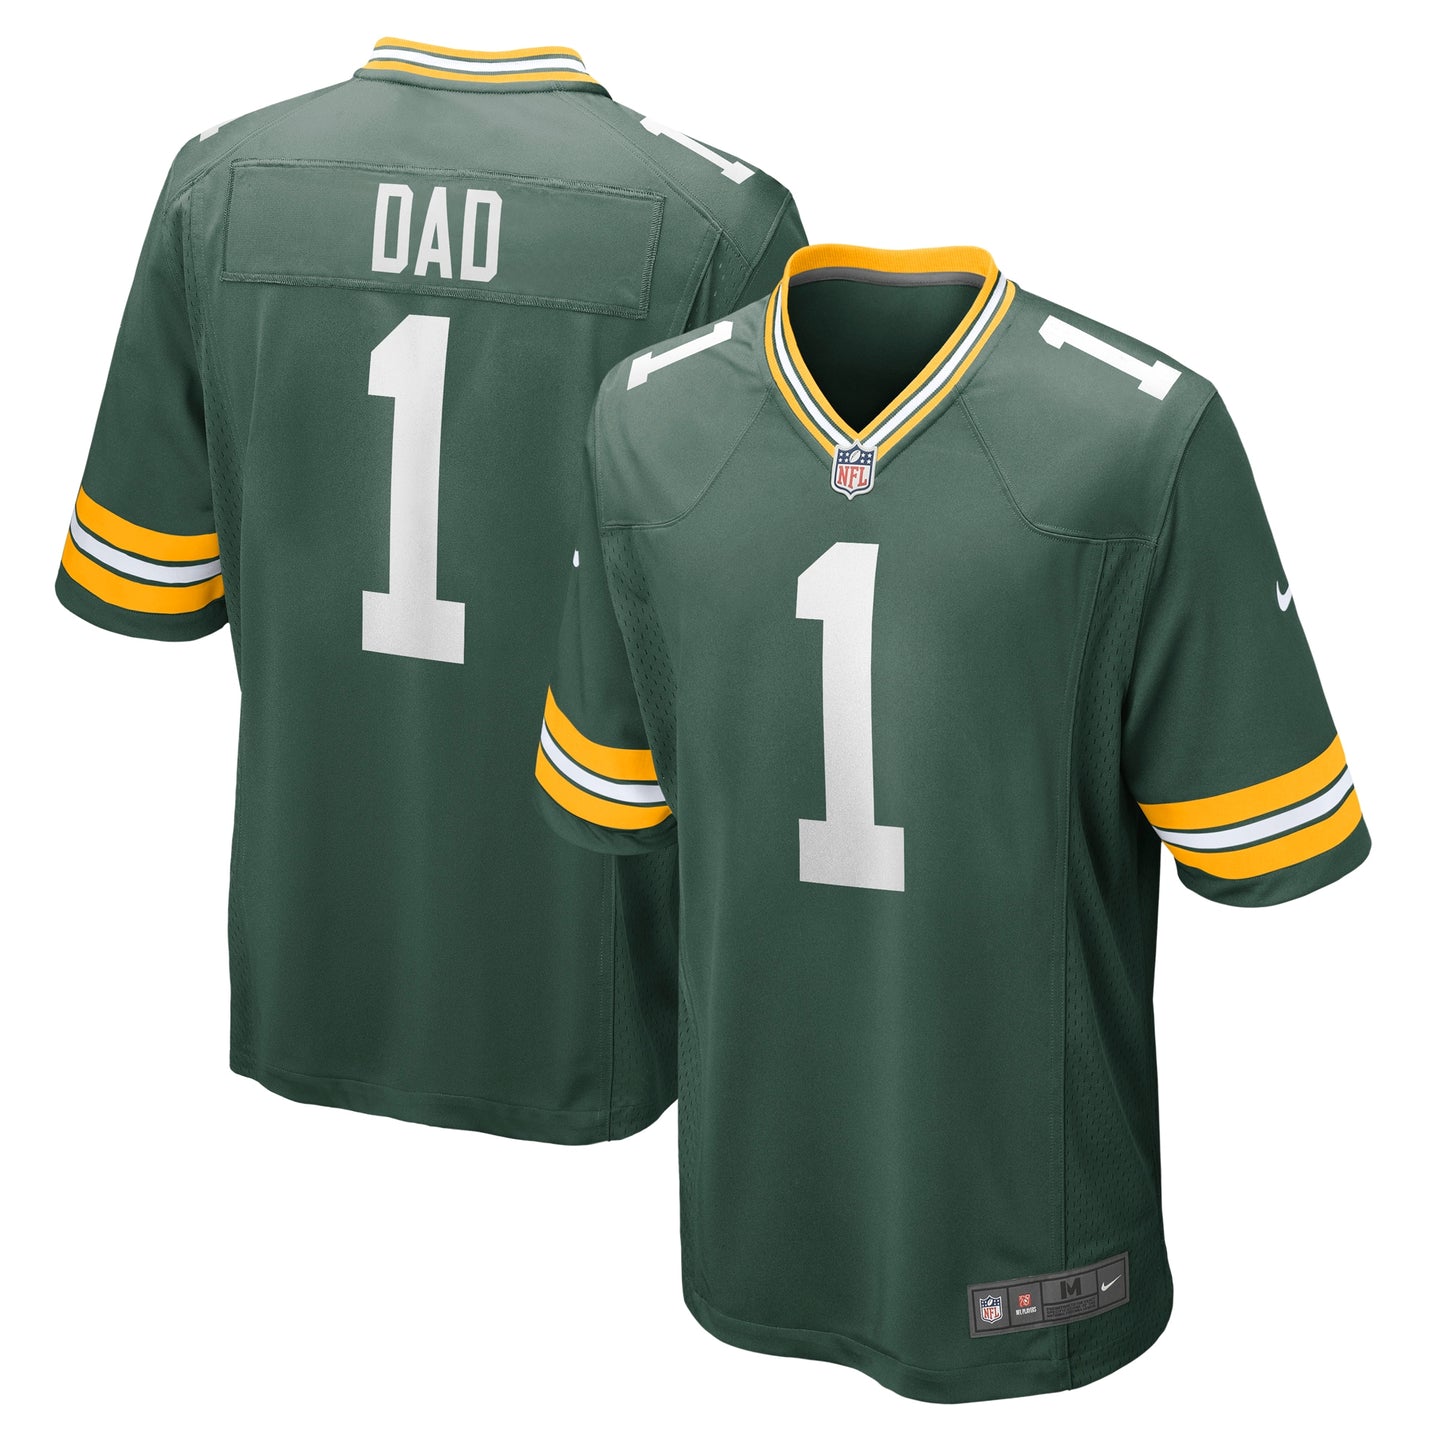 Number 1 Dad Green Bay Packers Nike Game Jersey - Green